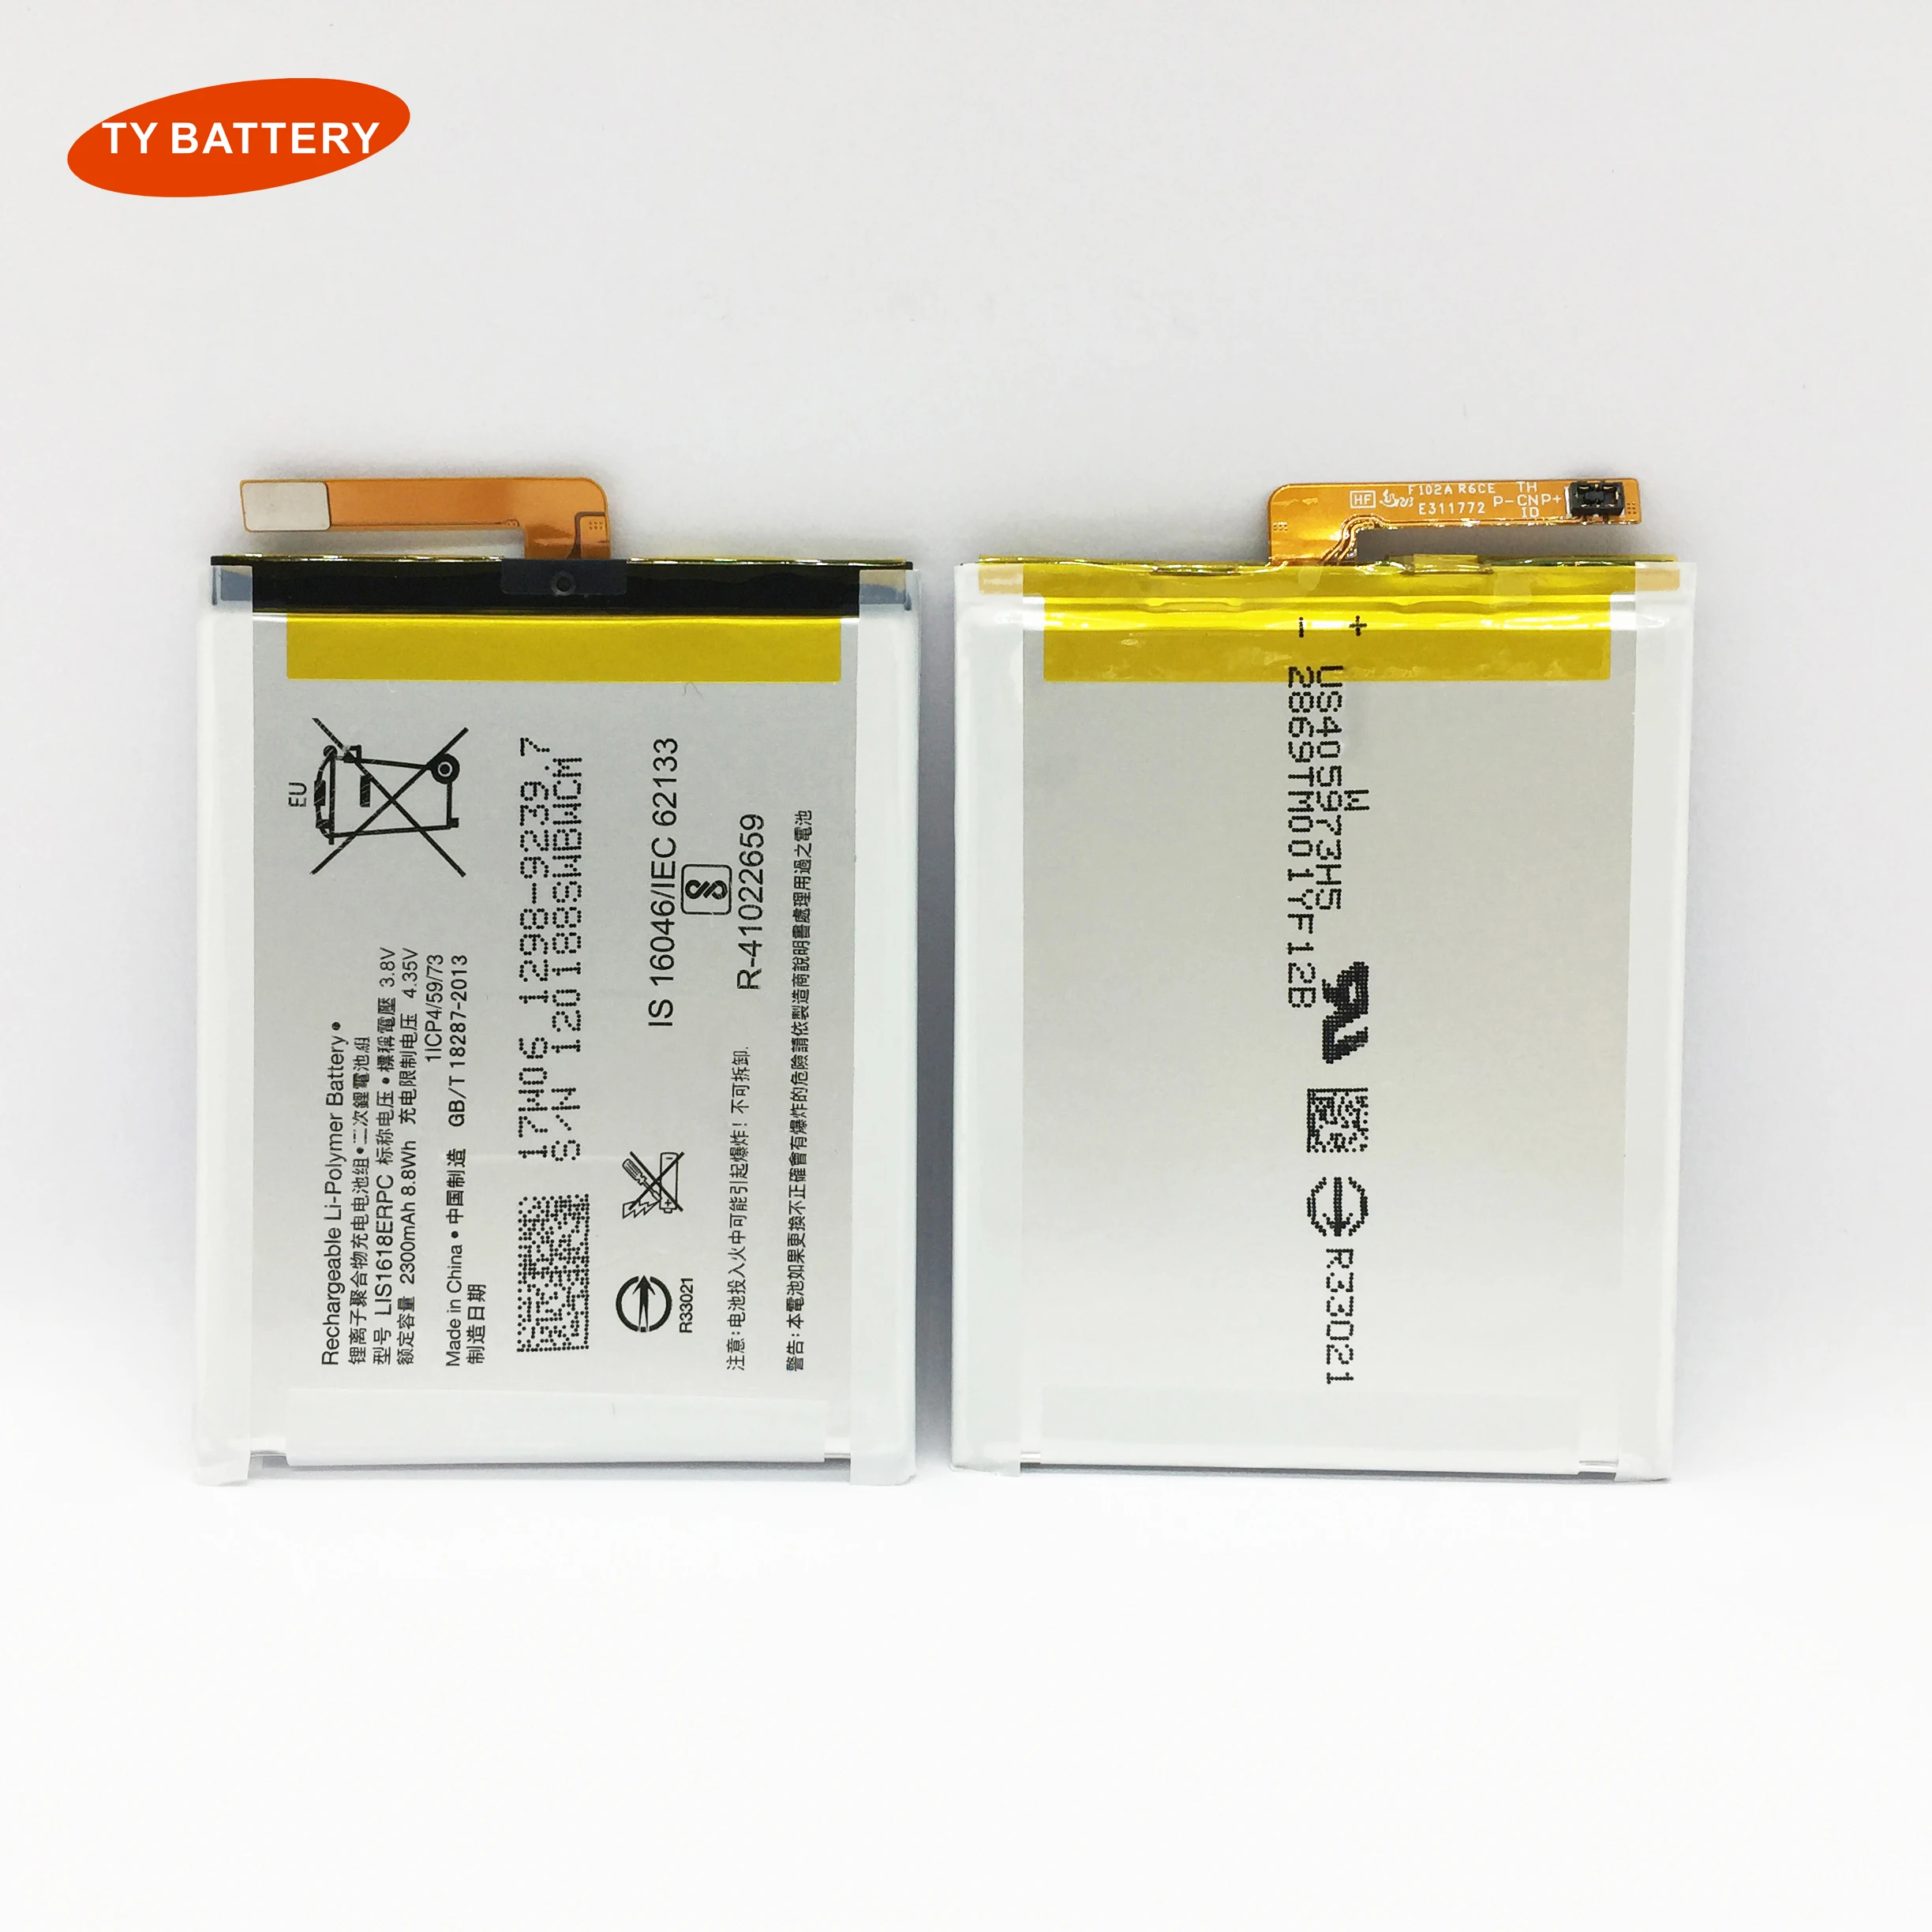 Humidity paperback diary Oem Factory Battery For Sony Lis1618erpc For Sony Xperia E5 Li-ion Battery  For Sony Xa Battery F3113 F3112 F3111 F3116 F3115 - Buy Battery For Sony,For  Sony Xperia E5 Battery,For Sony Xa